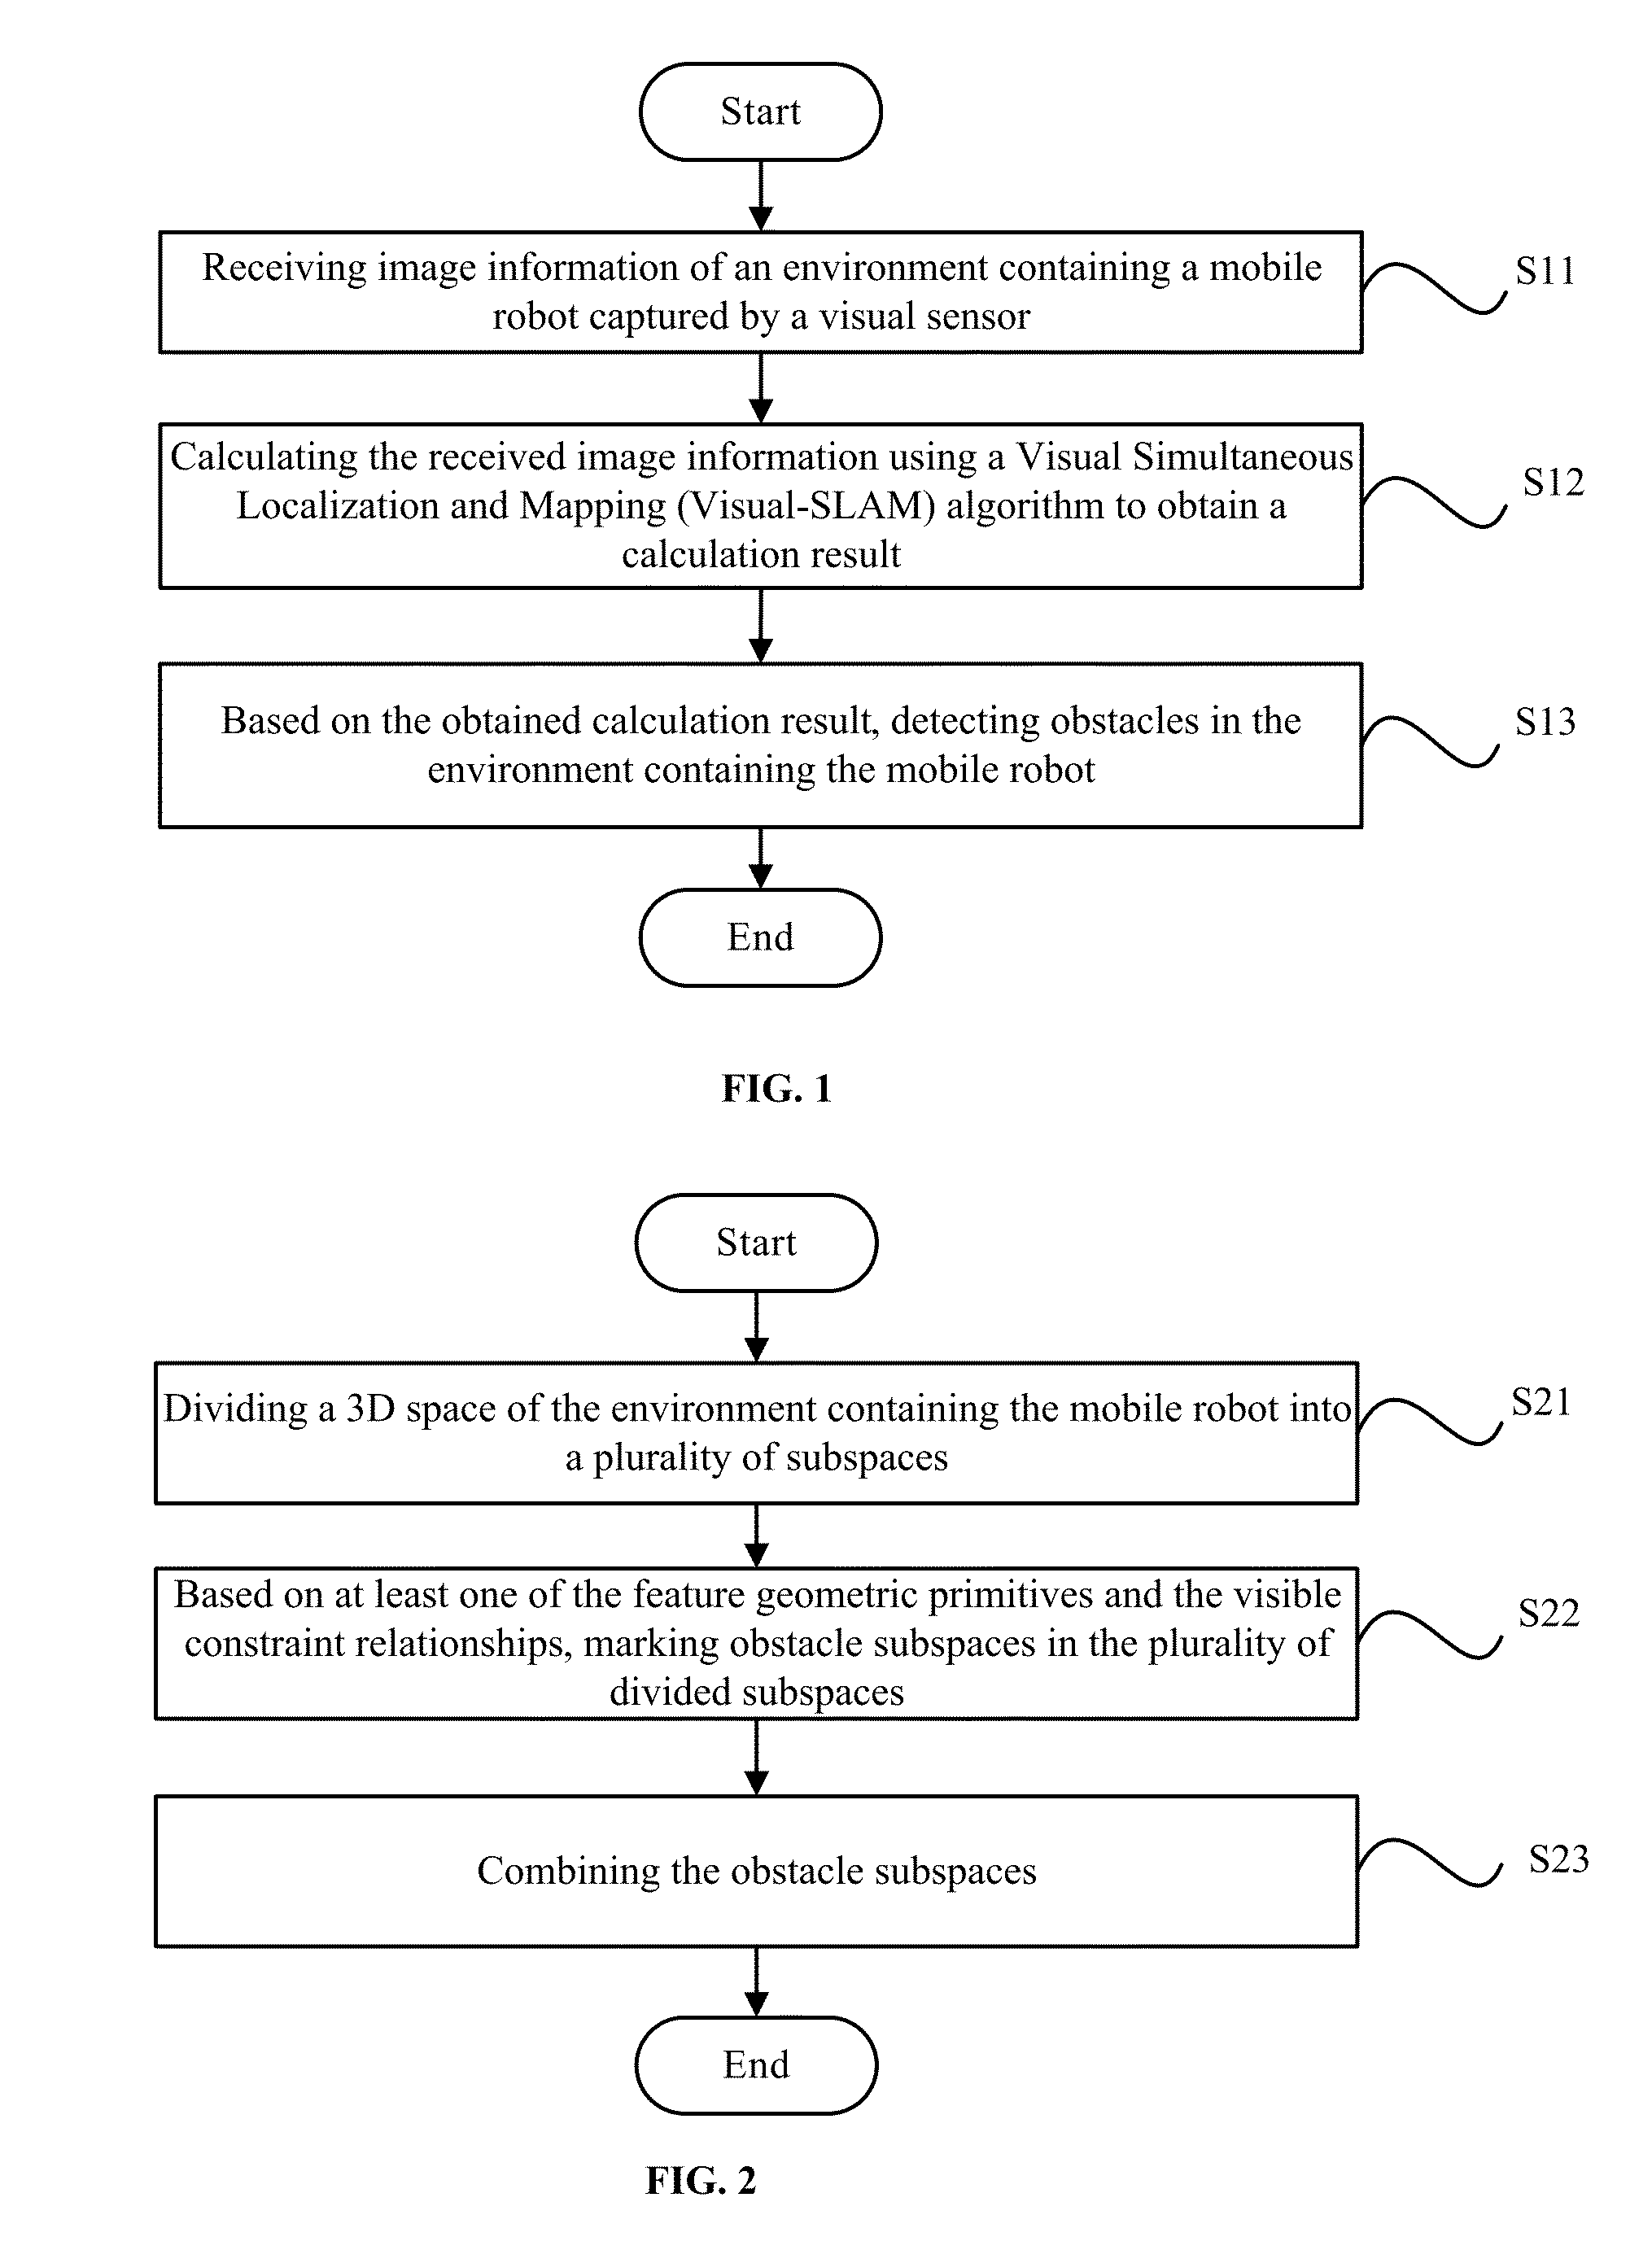 Visual-based obstacle detection method and apparatus for mobile robot